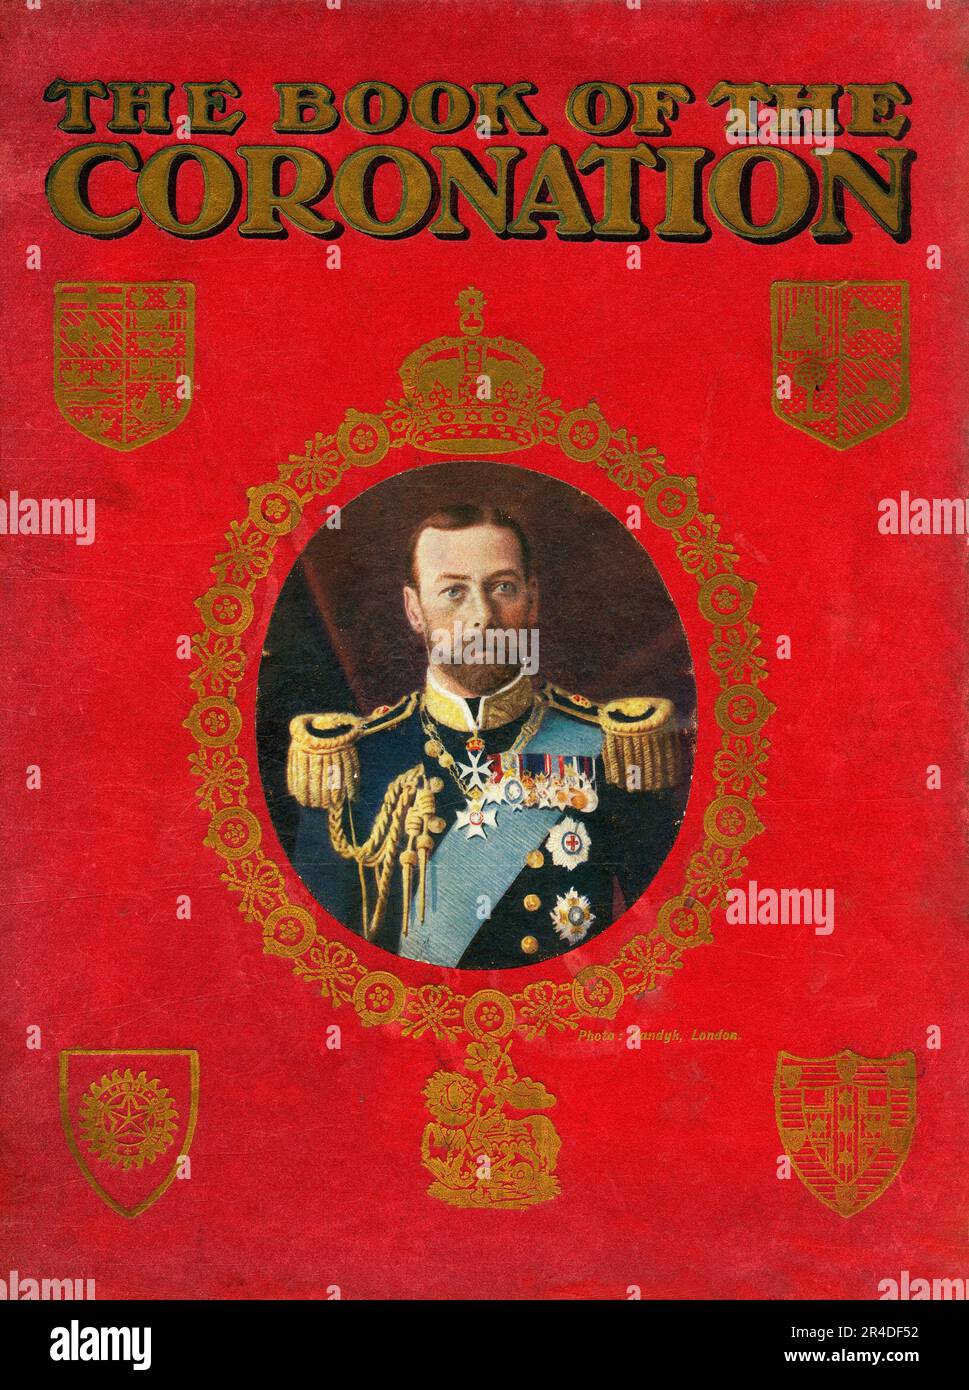 'The Book of the Coronation', 1911. King George V and his Queen consort Mary of Teck were crowned on 22 June 1911. From &quot;The Book of the Coronation&quot;. [Cassell and Company, Ltd., London, 1911] Stock Photo